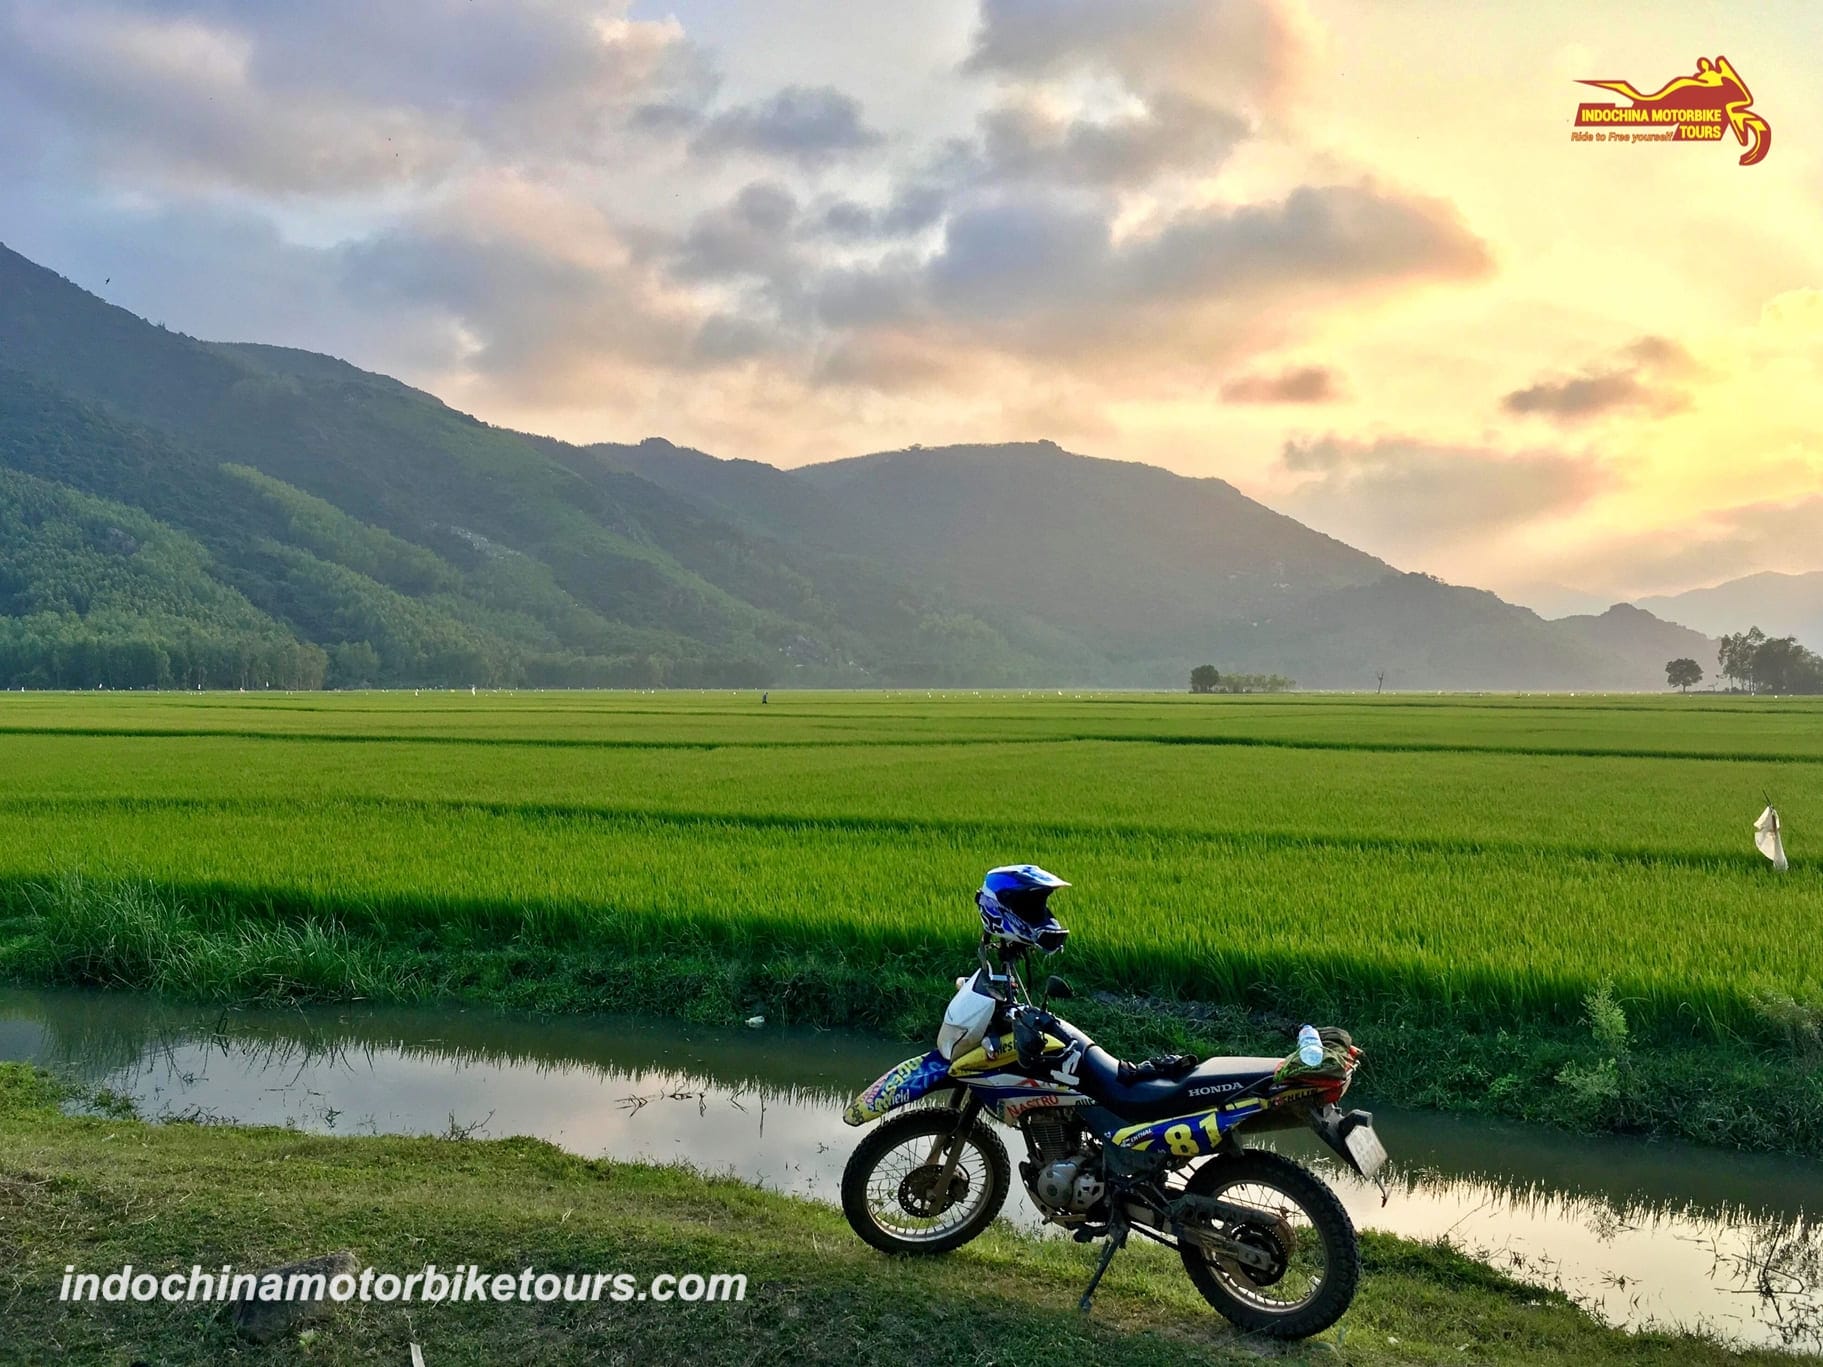 MOTORBIKE TOUR FROM HUE TO PHONG NHA AND THIEN DUONG CAVE